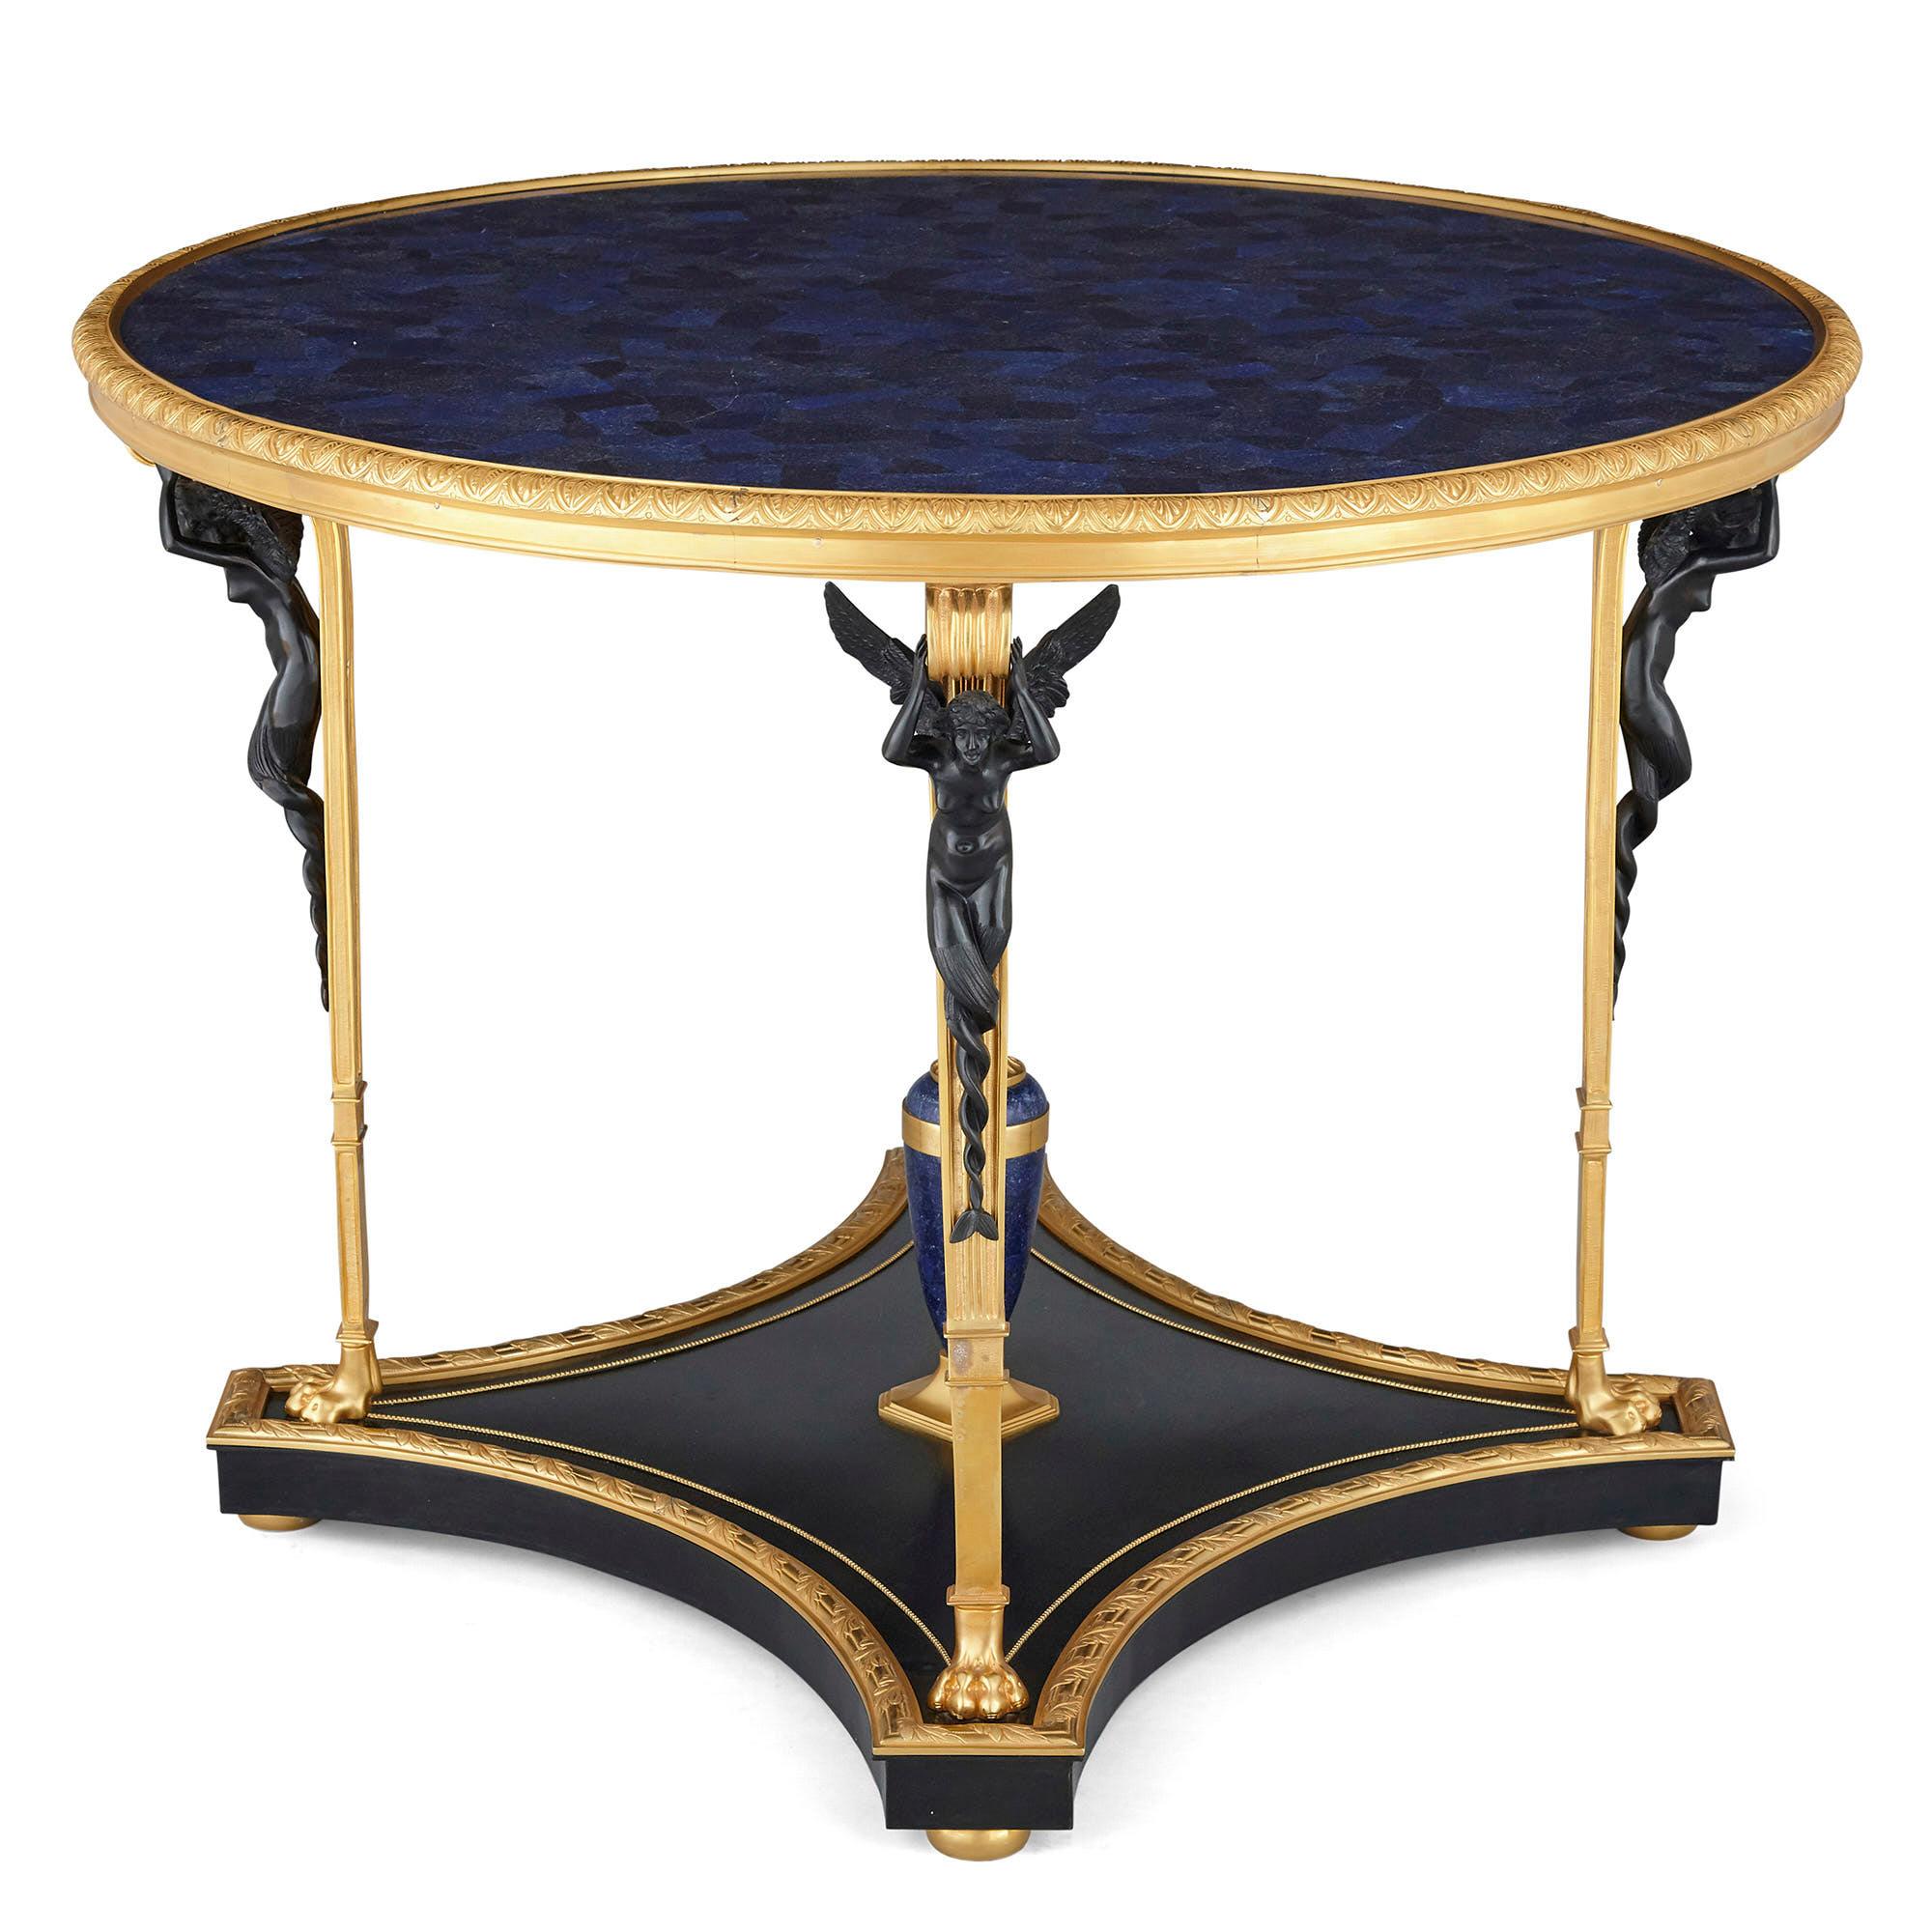 Neoclassical Empire style ormolu and lapis lazuli table with patinated bronze mounts,
French, 20th century
Dimensions: Height 74cm, diameter 100cm

Finely wrought in the French Neoclassical Empire style, this centre table features a lustrous